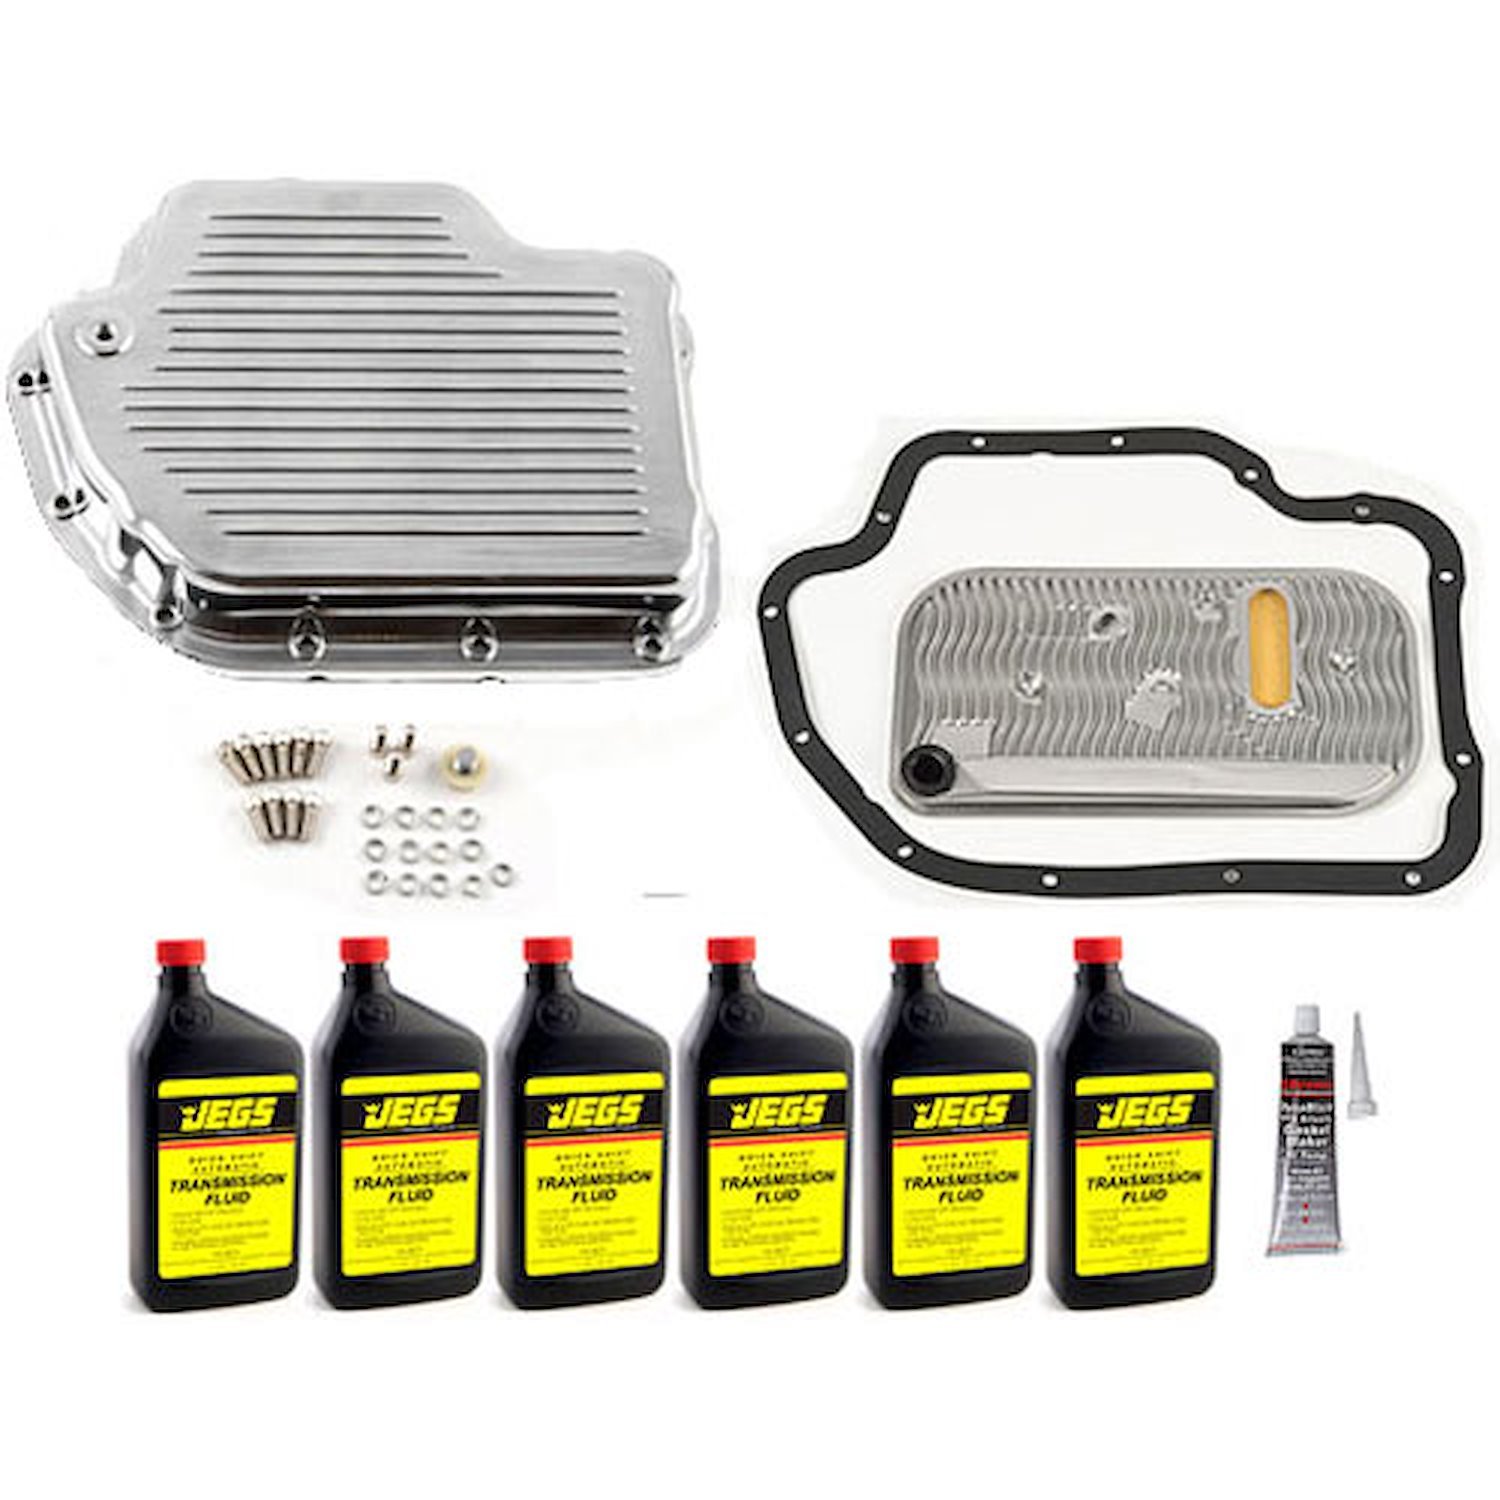 TH400 Transmission Pan Kit Includes: Speedmaster TH400 Finned Aluminum Oil Pan 746-PCE221.1005